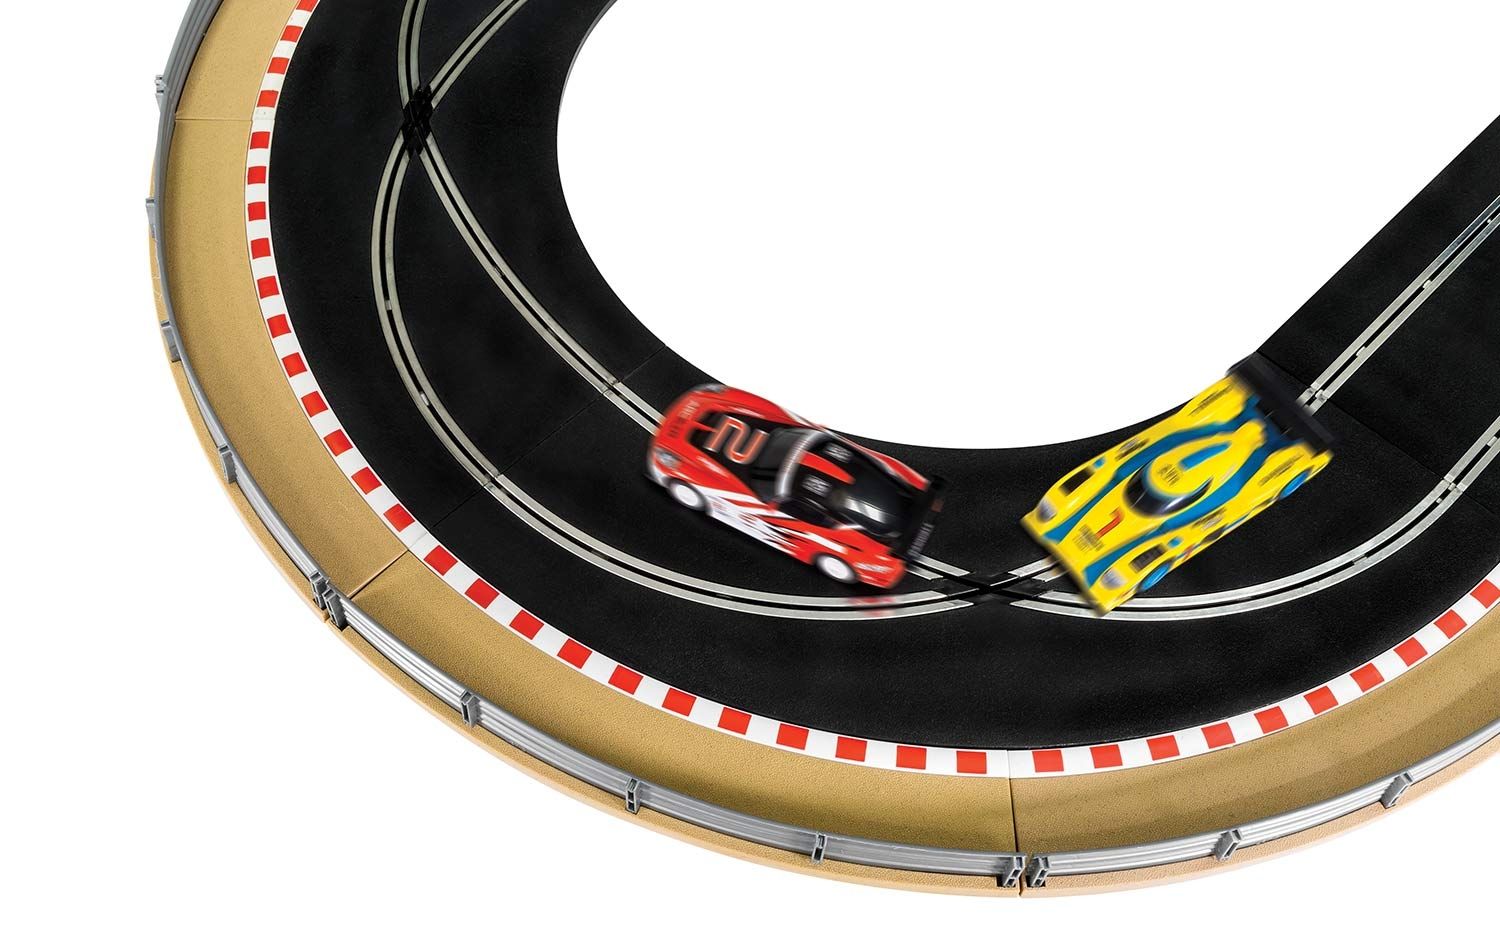 Scalextric Track & Accessories - Scalextric Slot Car Track